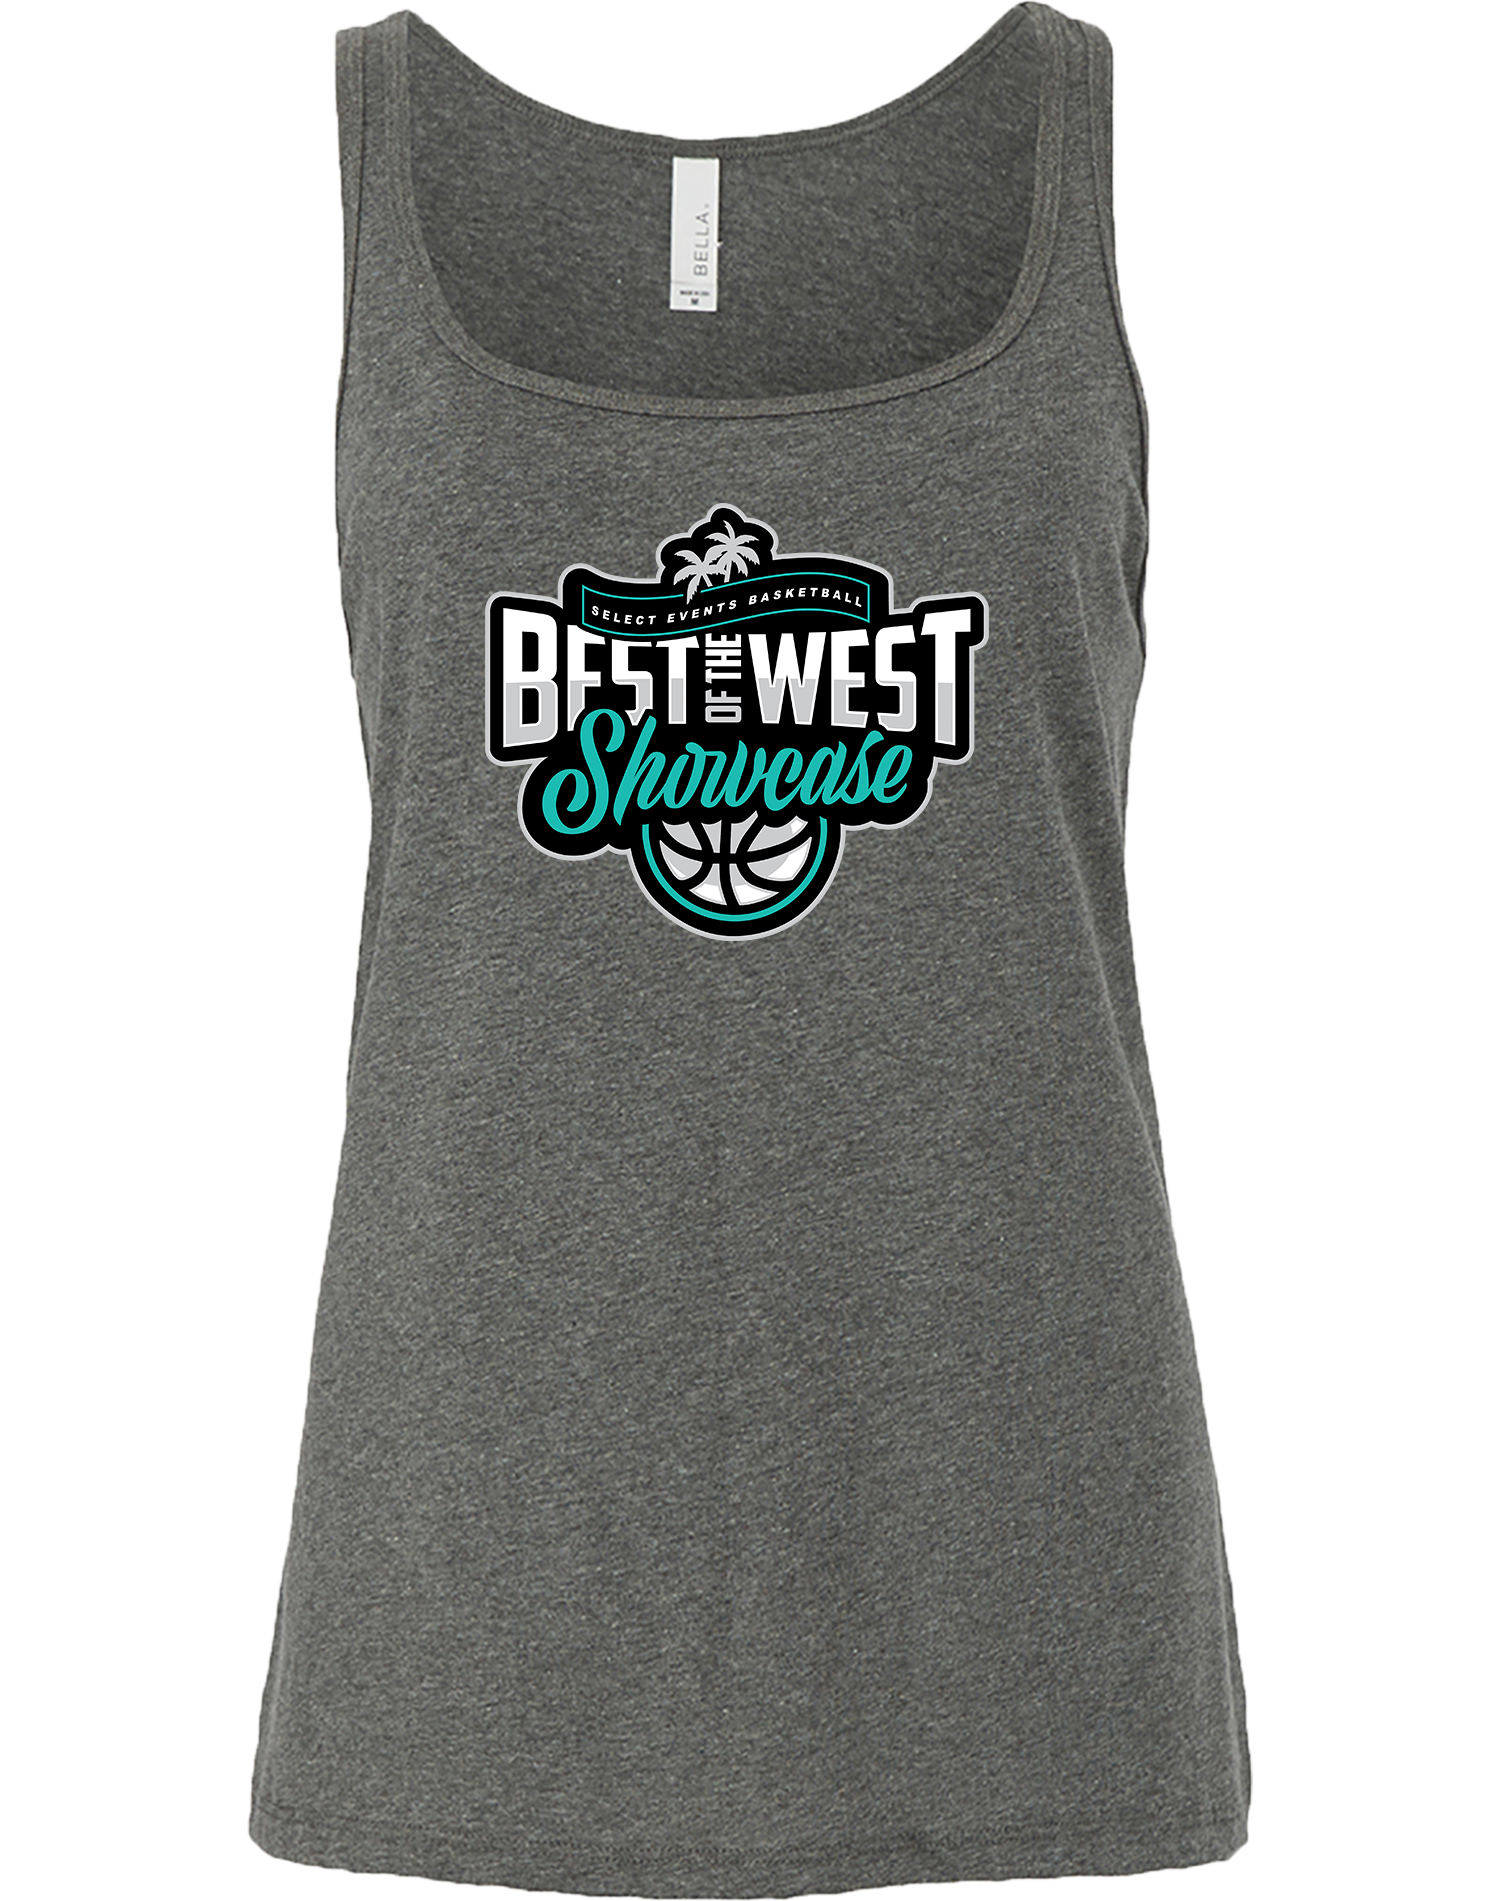 TANK TOP - 2023 Best Of The West Showcase